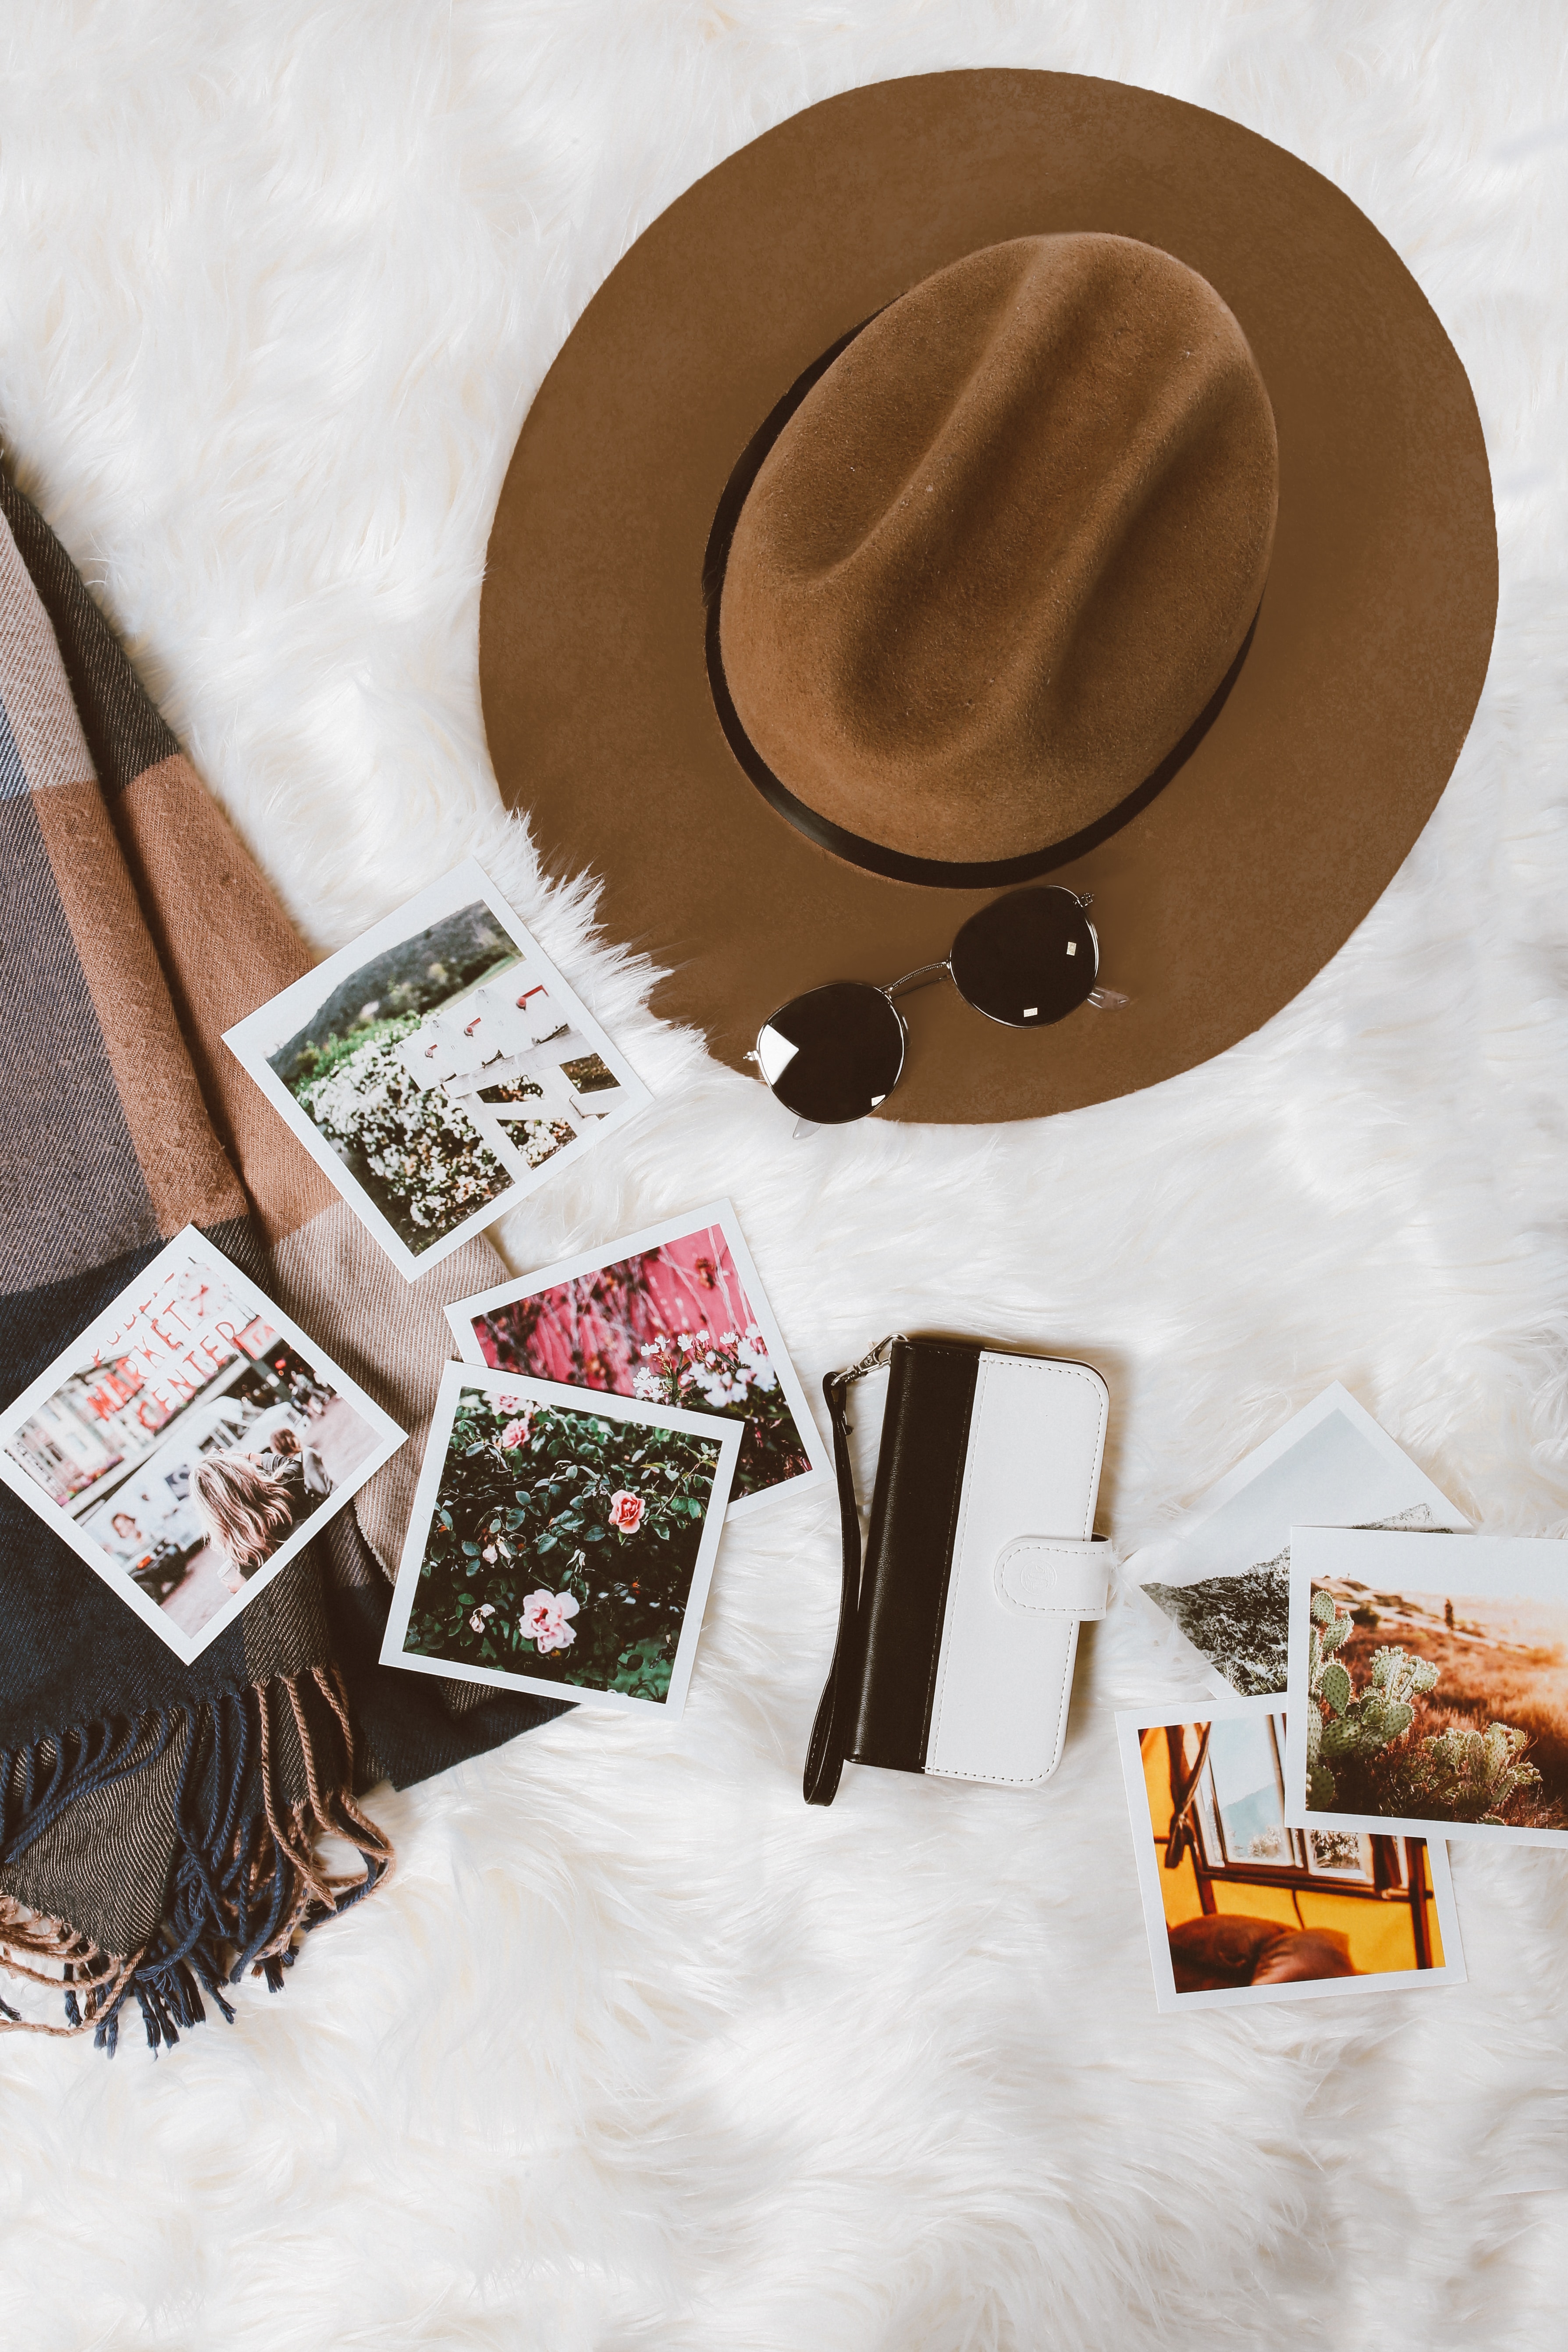 images laid out on a bed and a travel hat. The images are of fall travel destinations